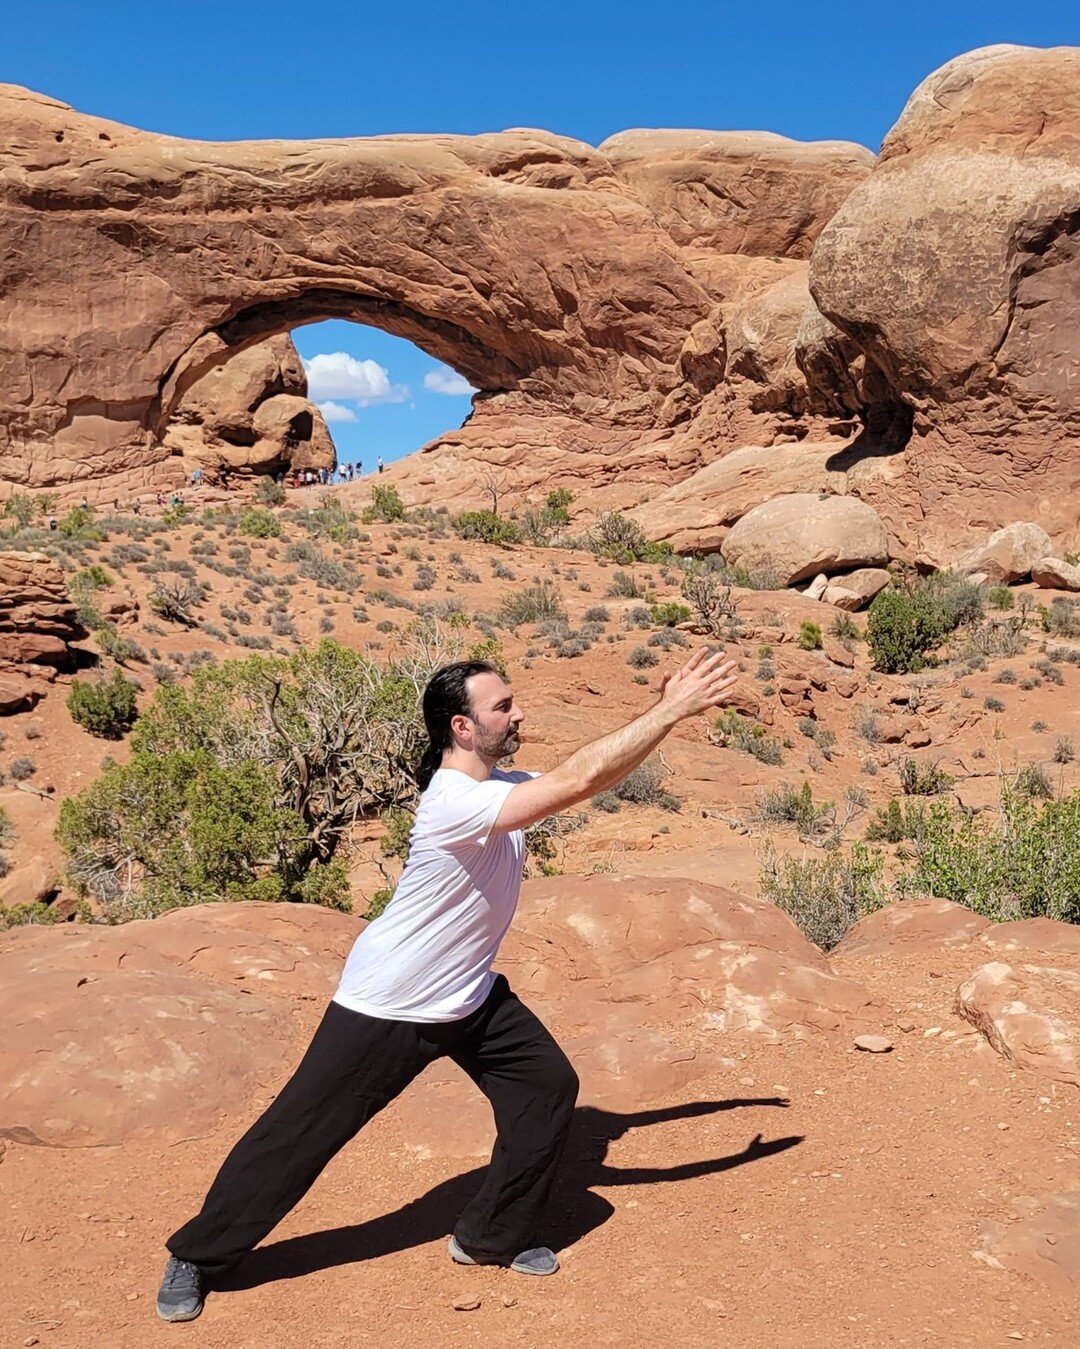 Qi Gong for hypertension and stress relief at Arches National Park. See my website or YouTube to watch.

https://qimethods.com/episodes/episode-8-arches

#travelingthedao #journeytodaohouse #Issa #archesnationalpark #qigong #hypertension #stressrelie